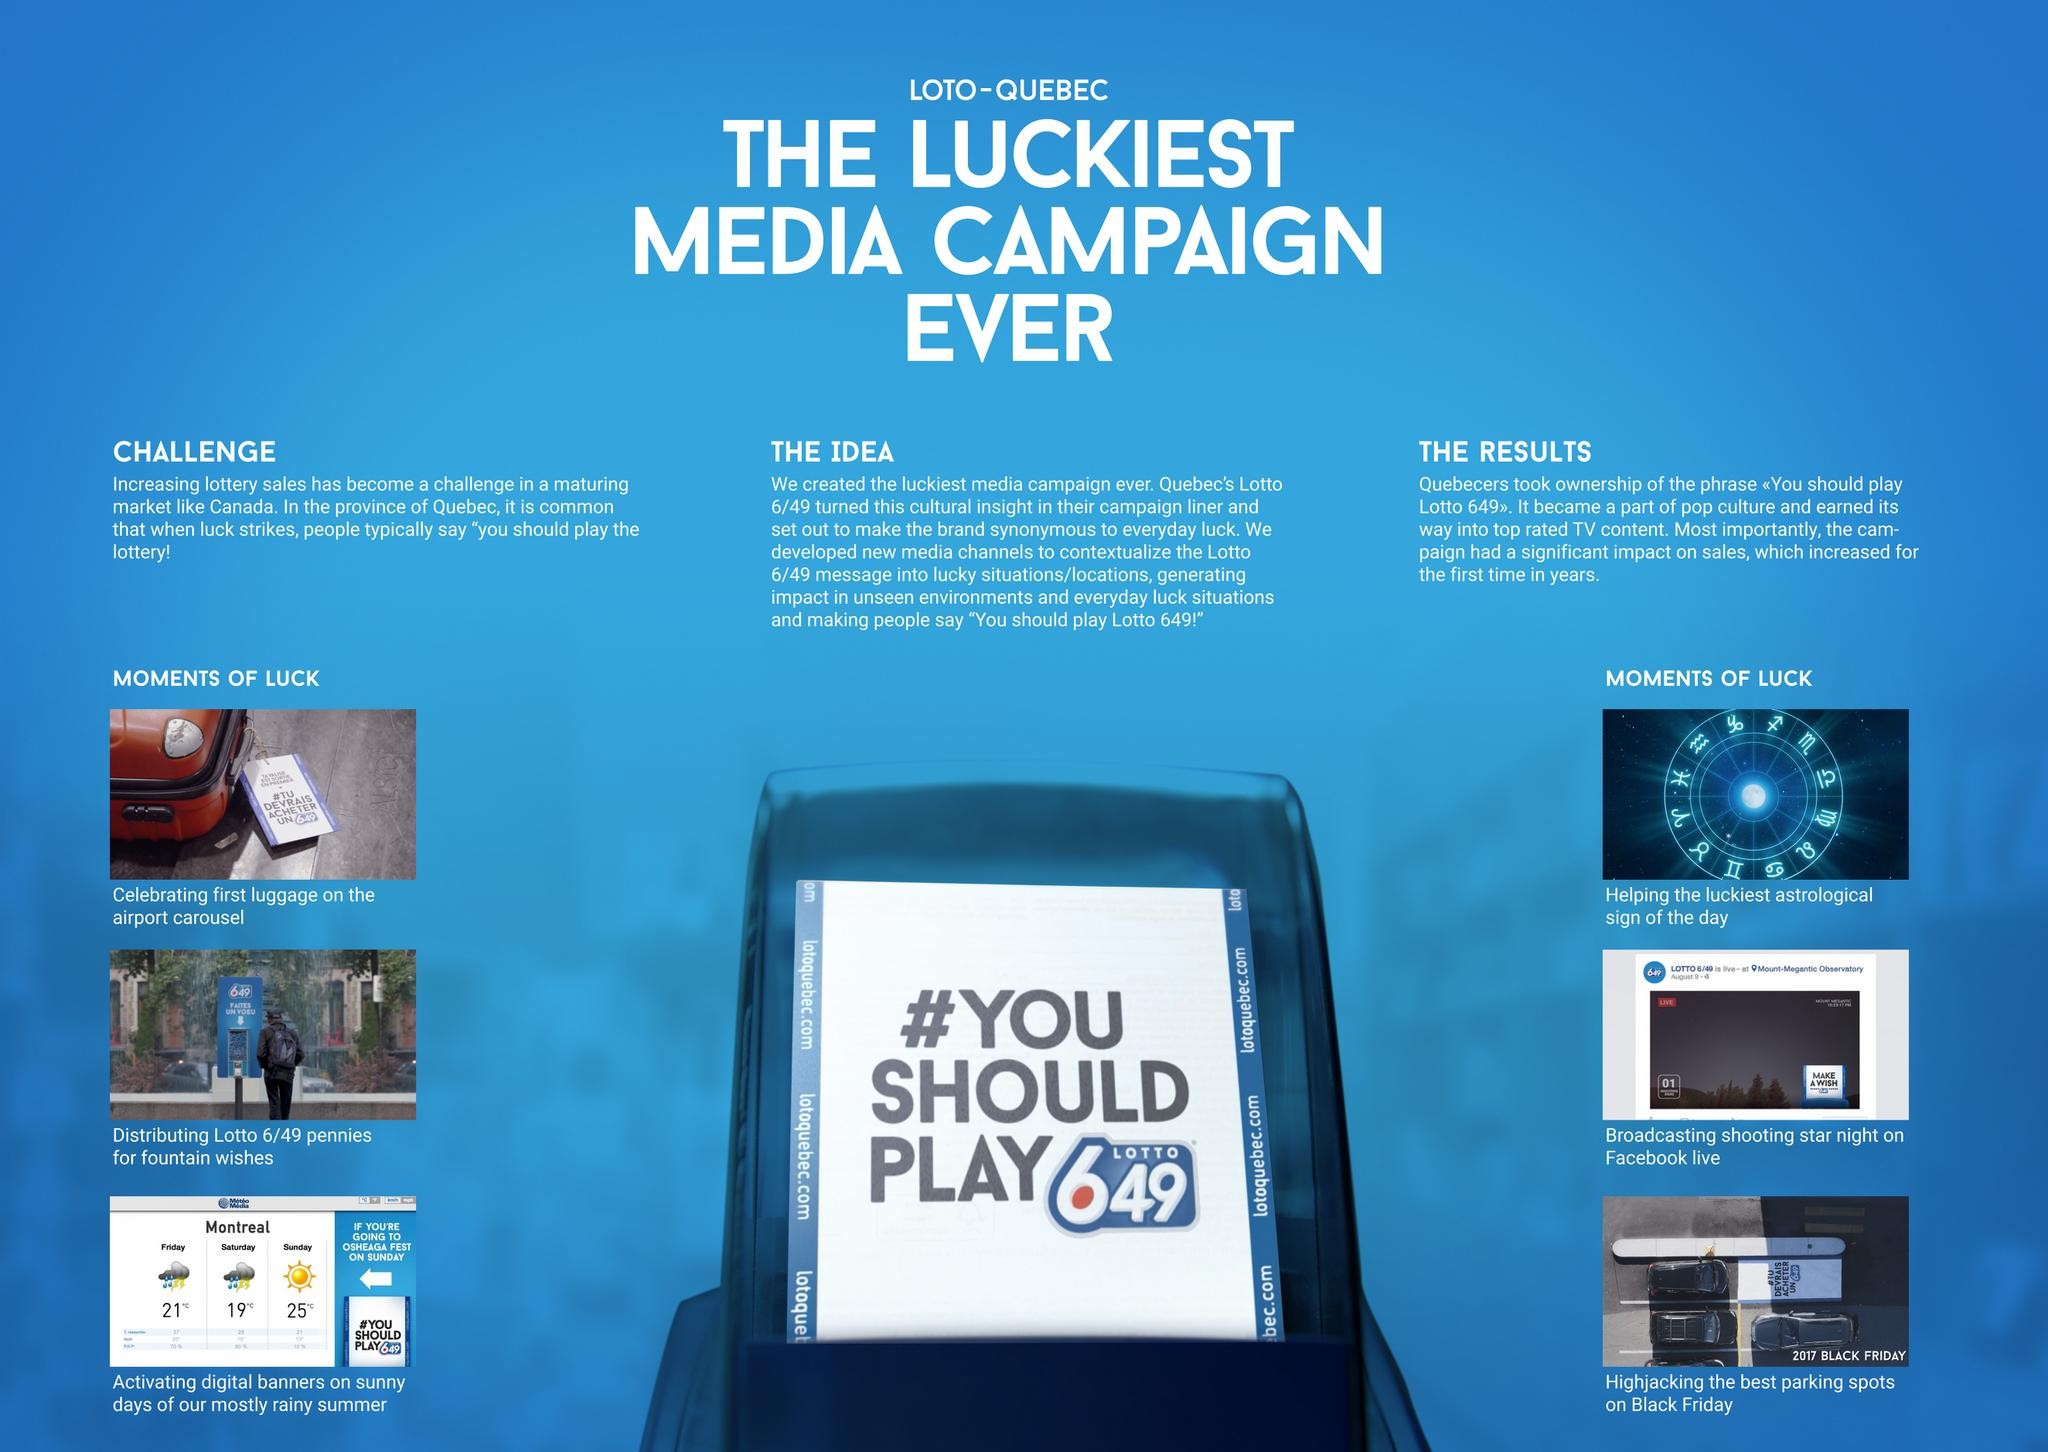 The Luckiest Media Campaign Ever